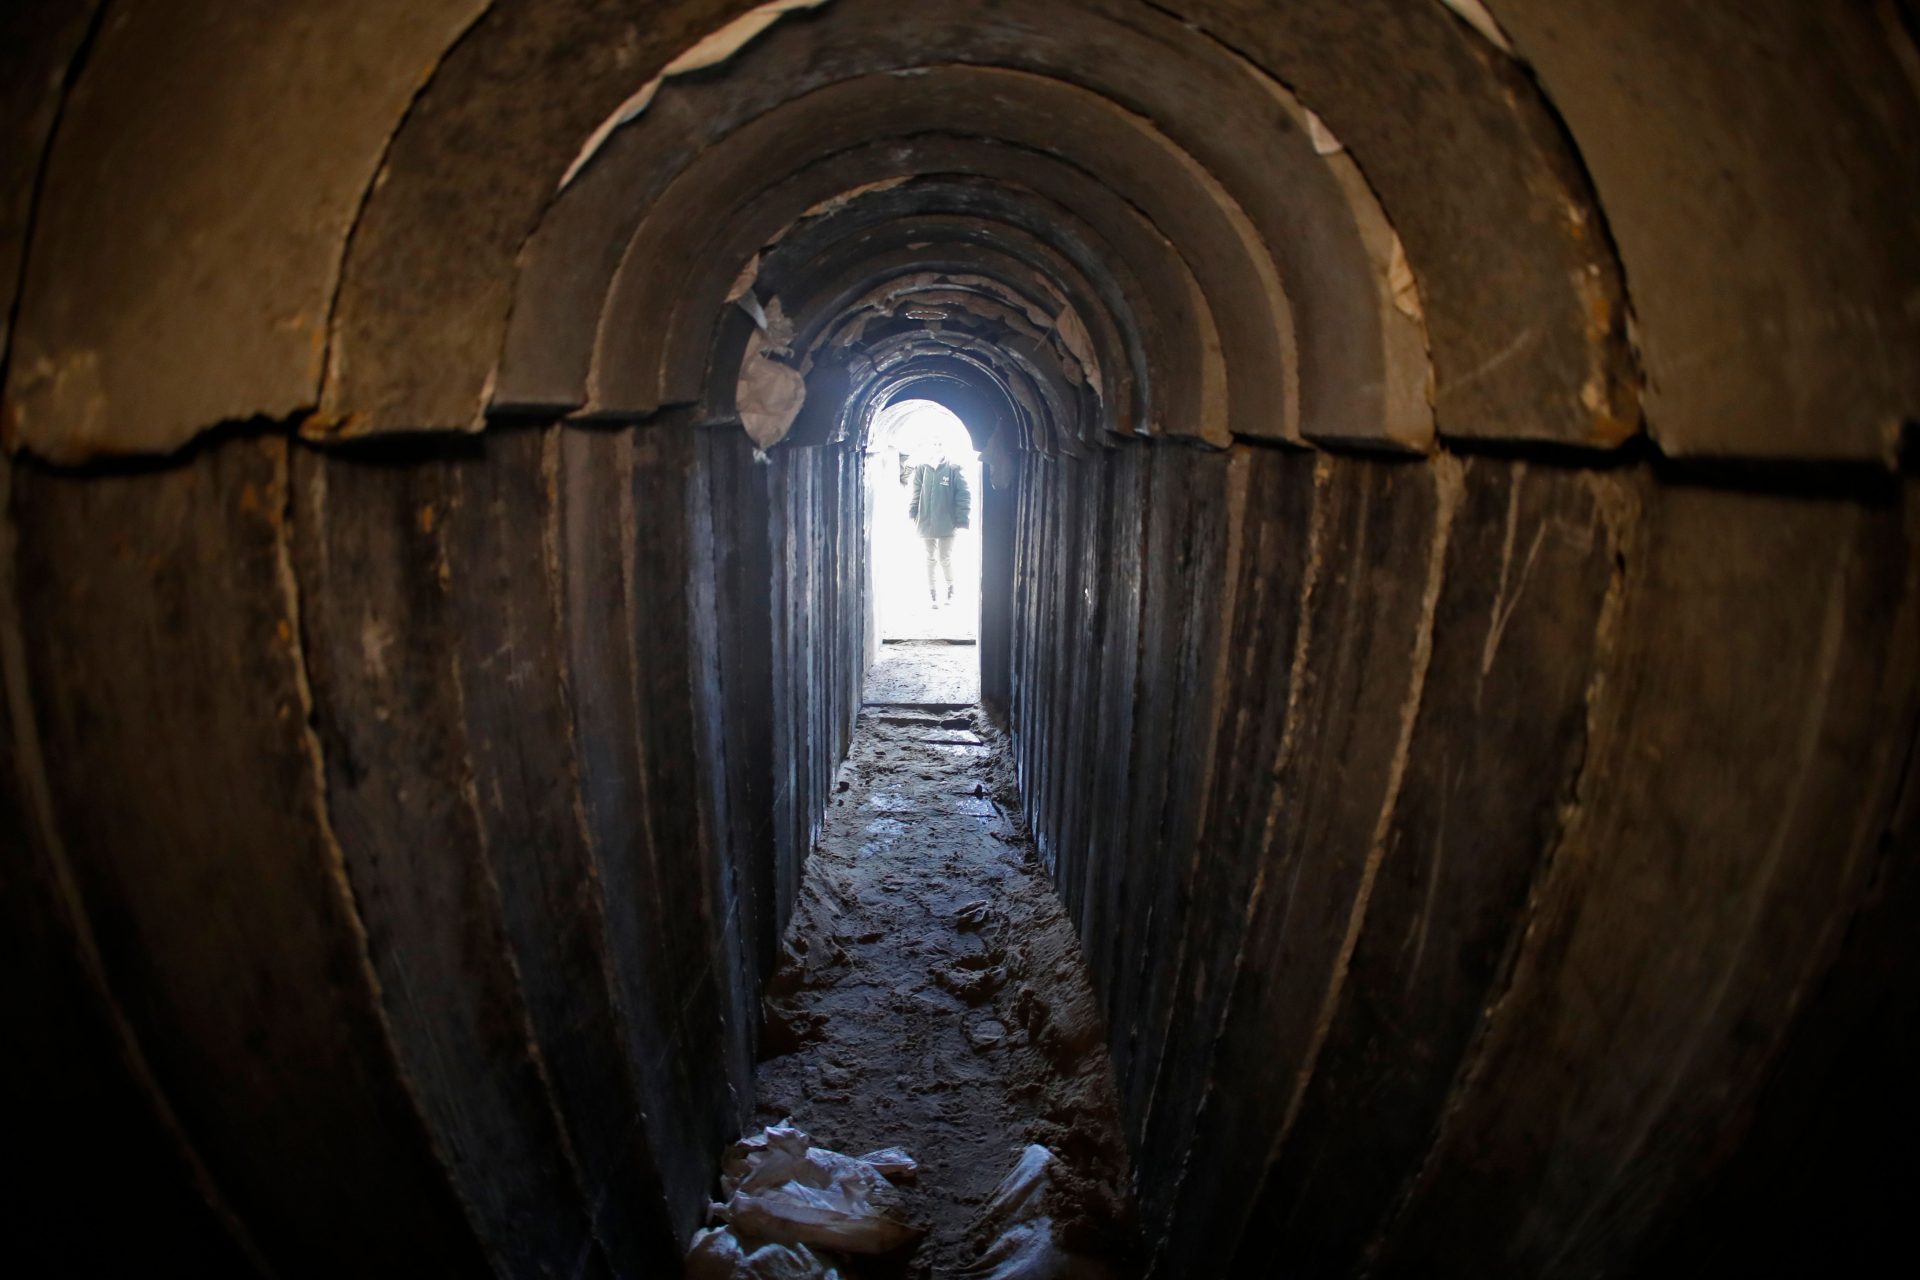 Did Hamas use tunnels for the October 8th attack?